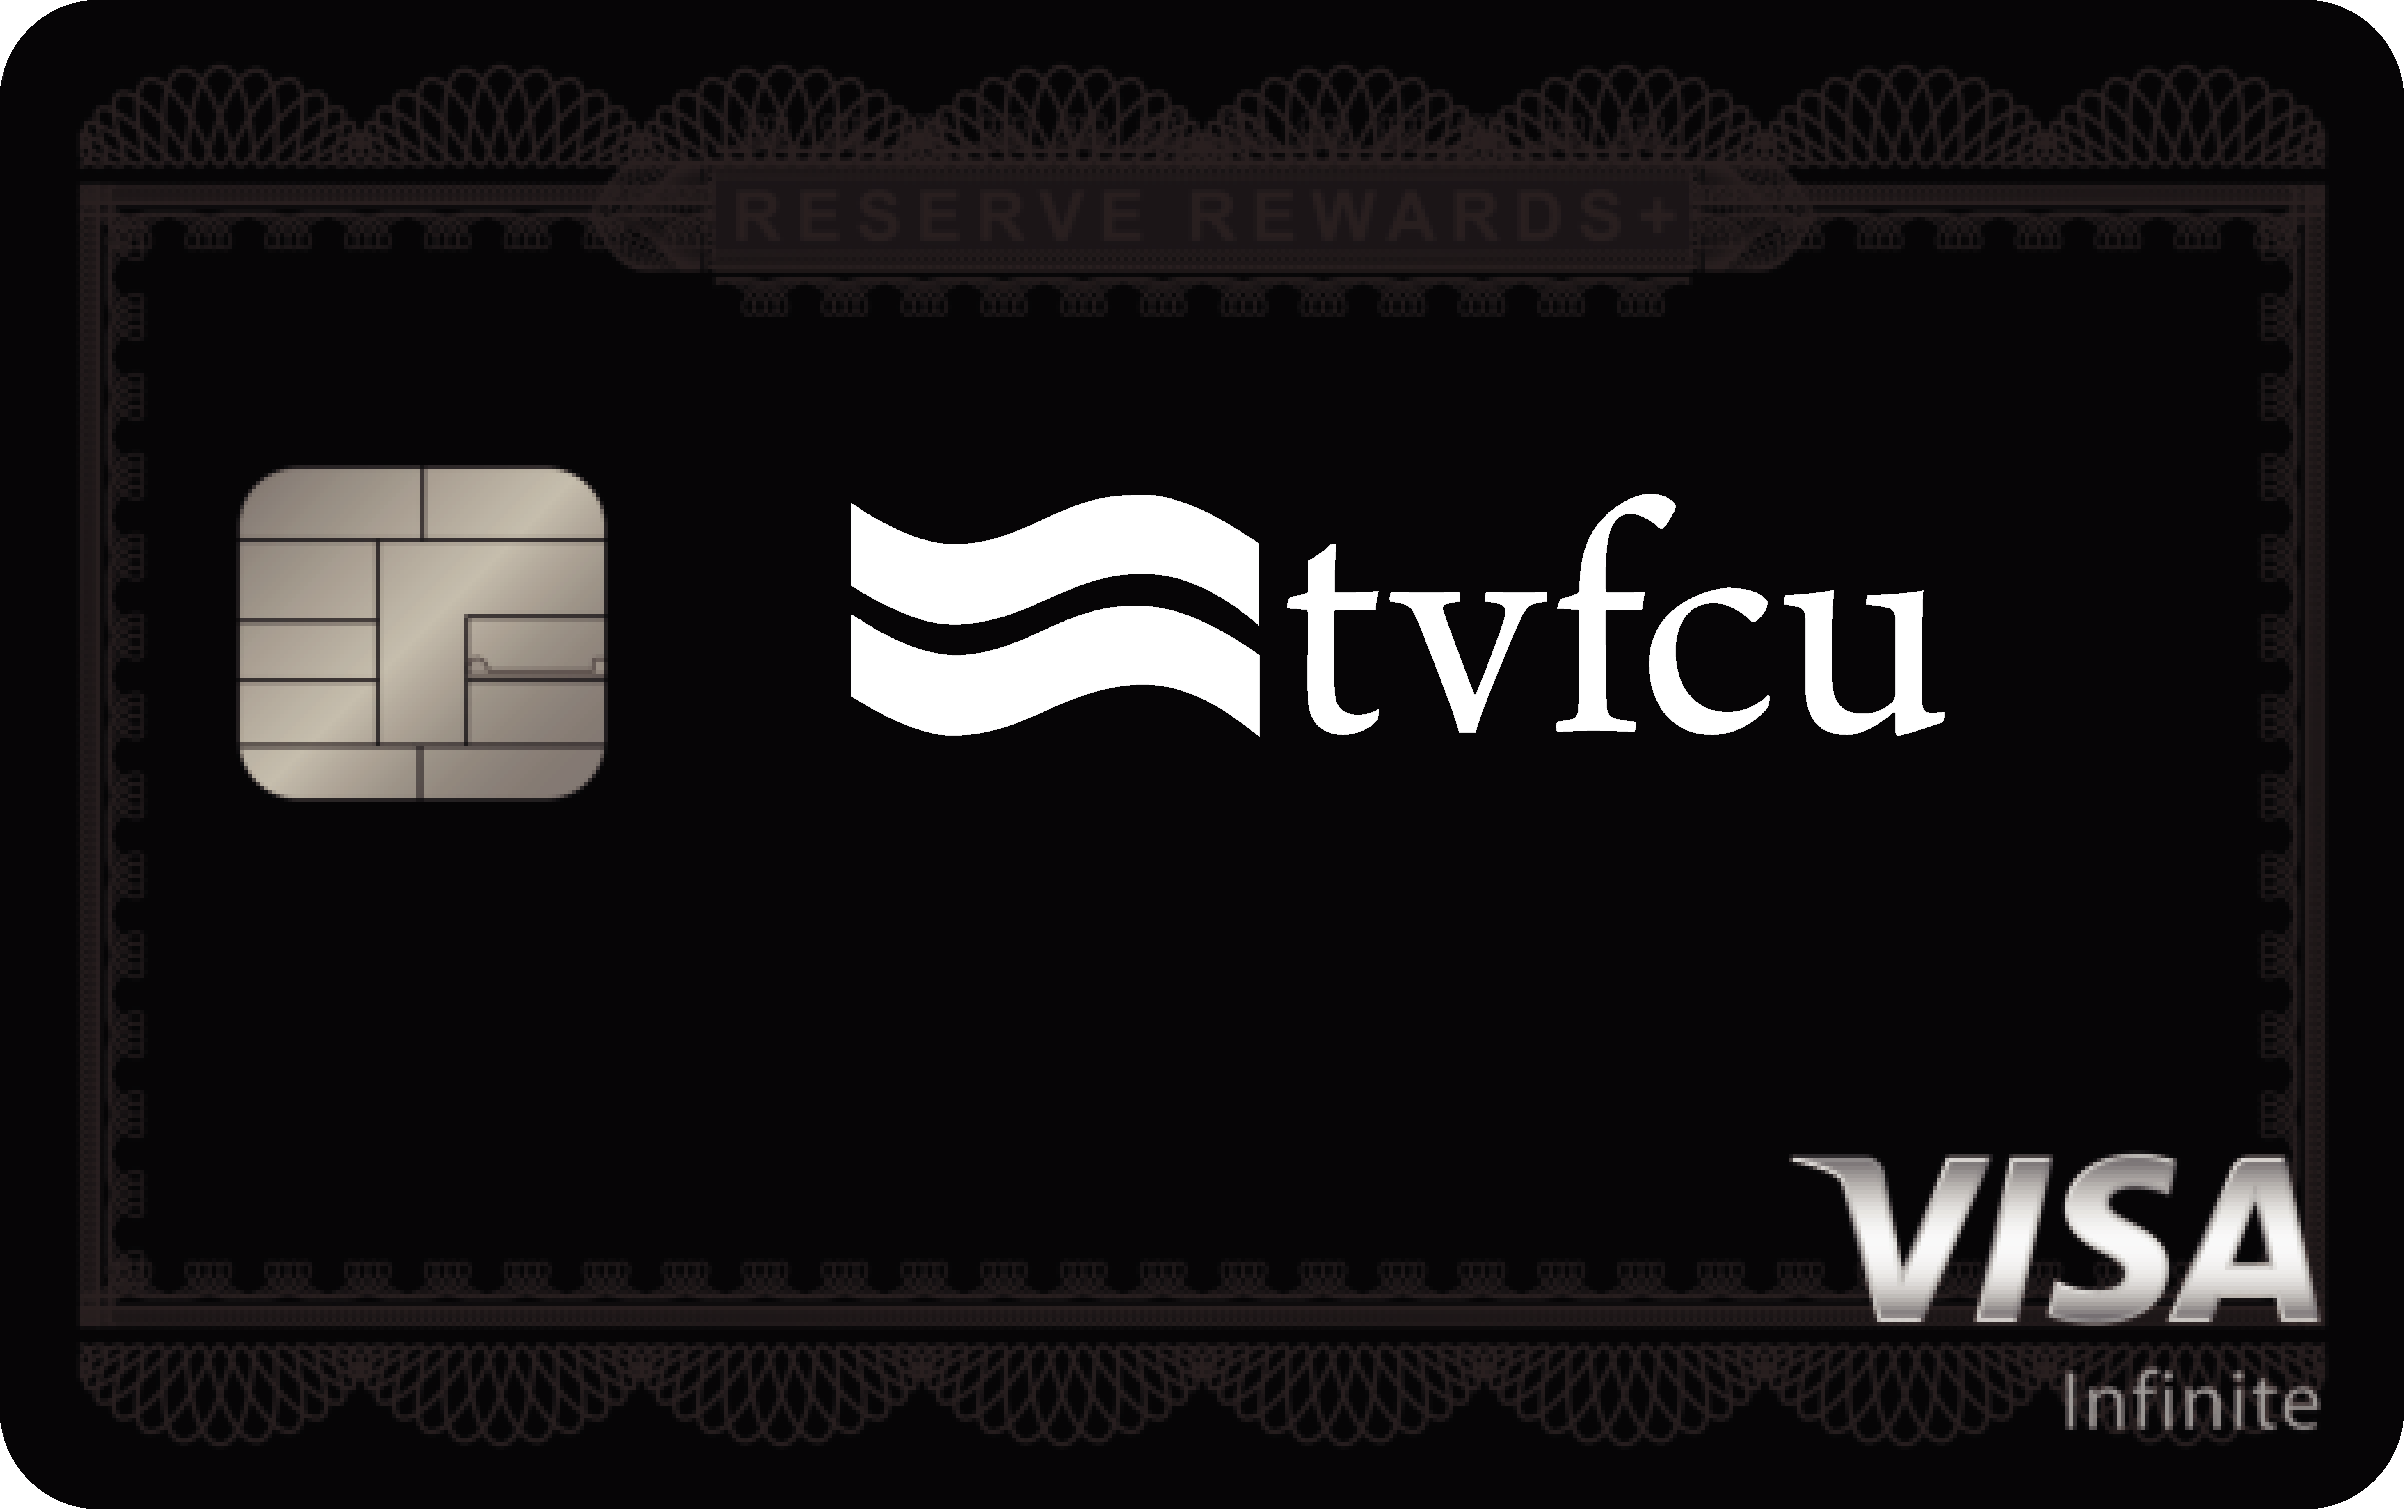 Tennessee Valley Federal Credit Union Reserve Rewards+ Card